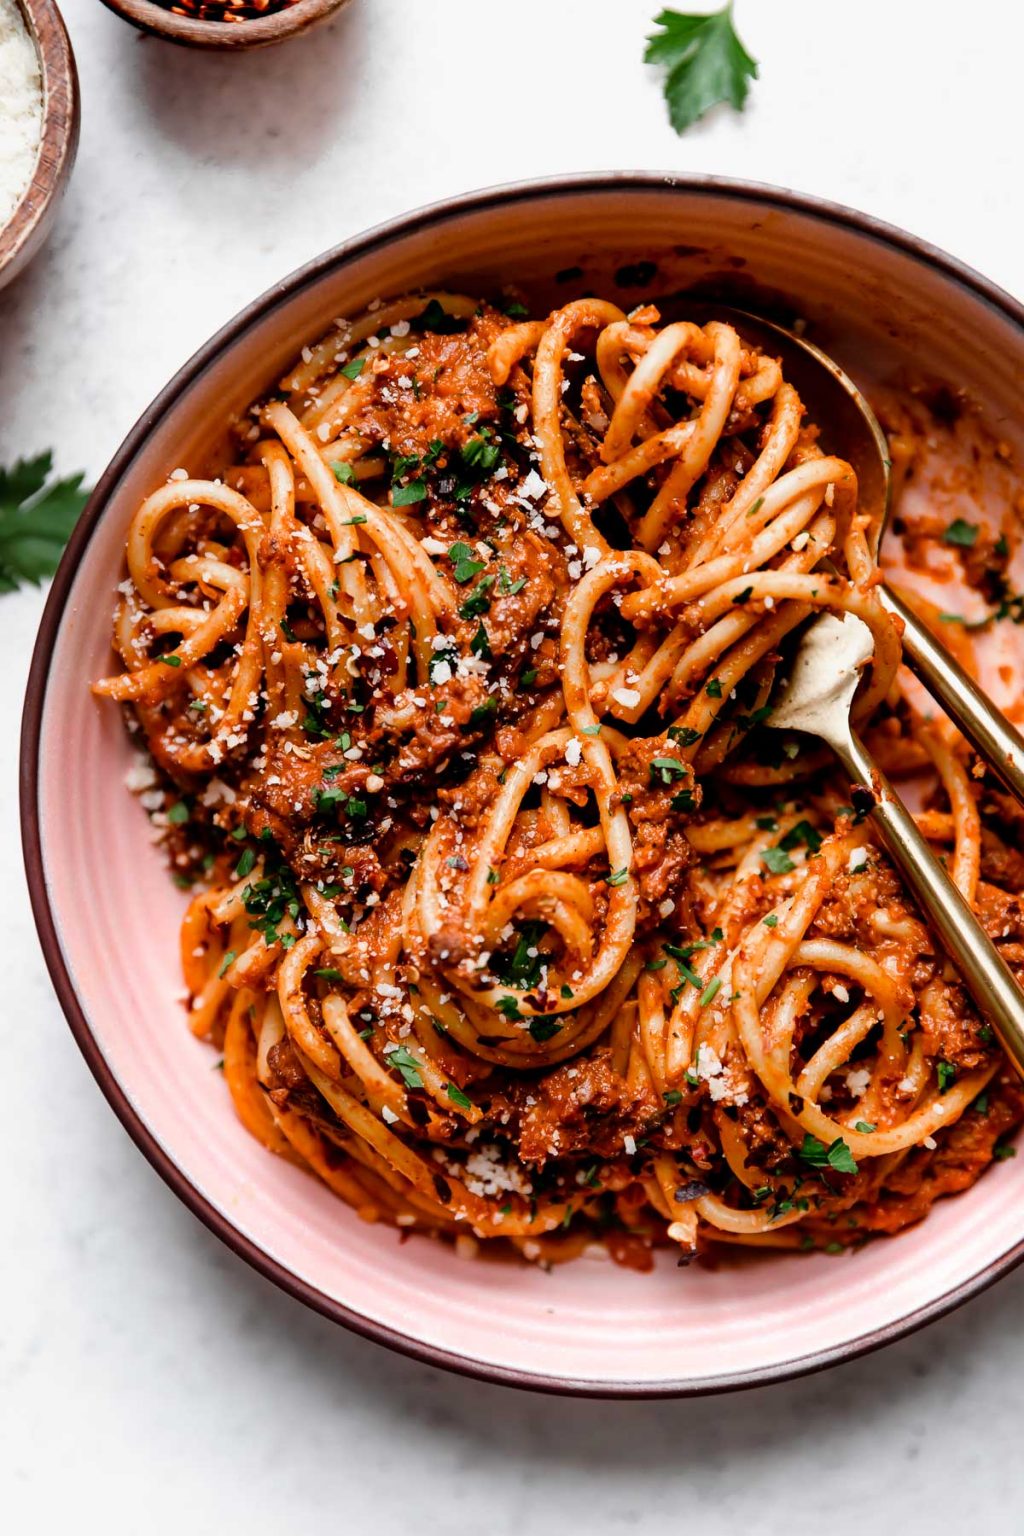 Best-Ever Bolognese Sauce Recipe (Stovetop, Slow Cooker, & Instant Pot)